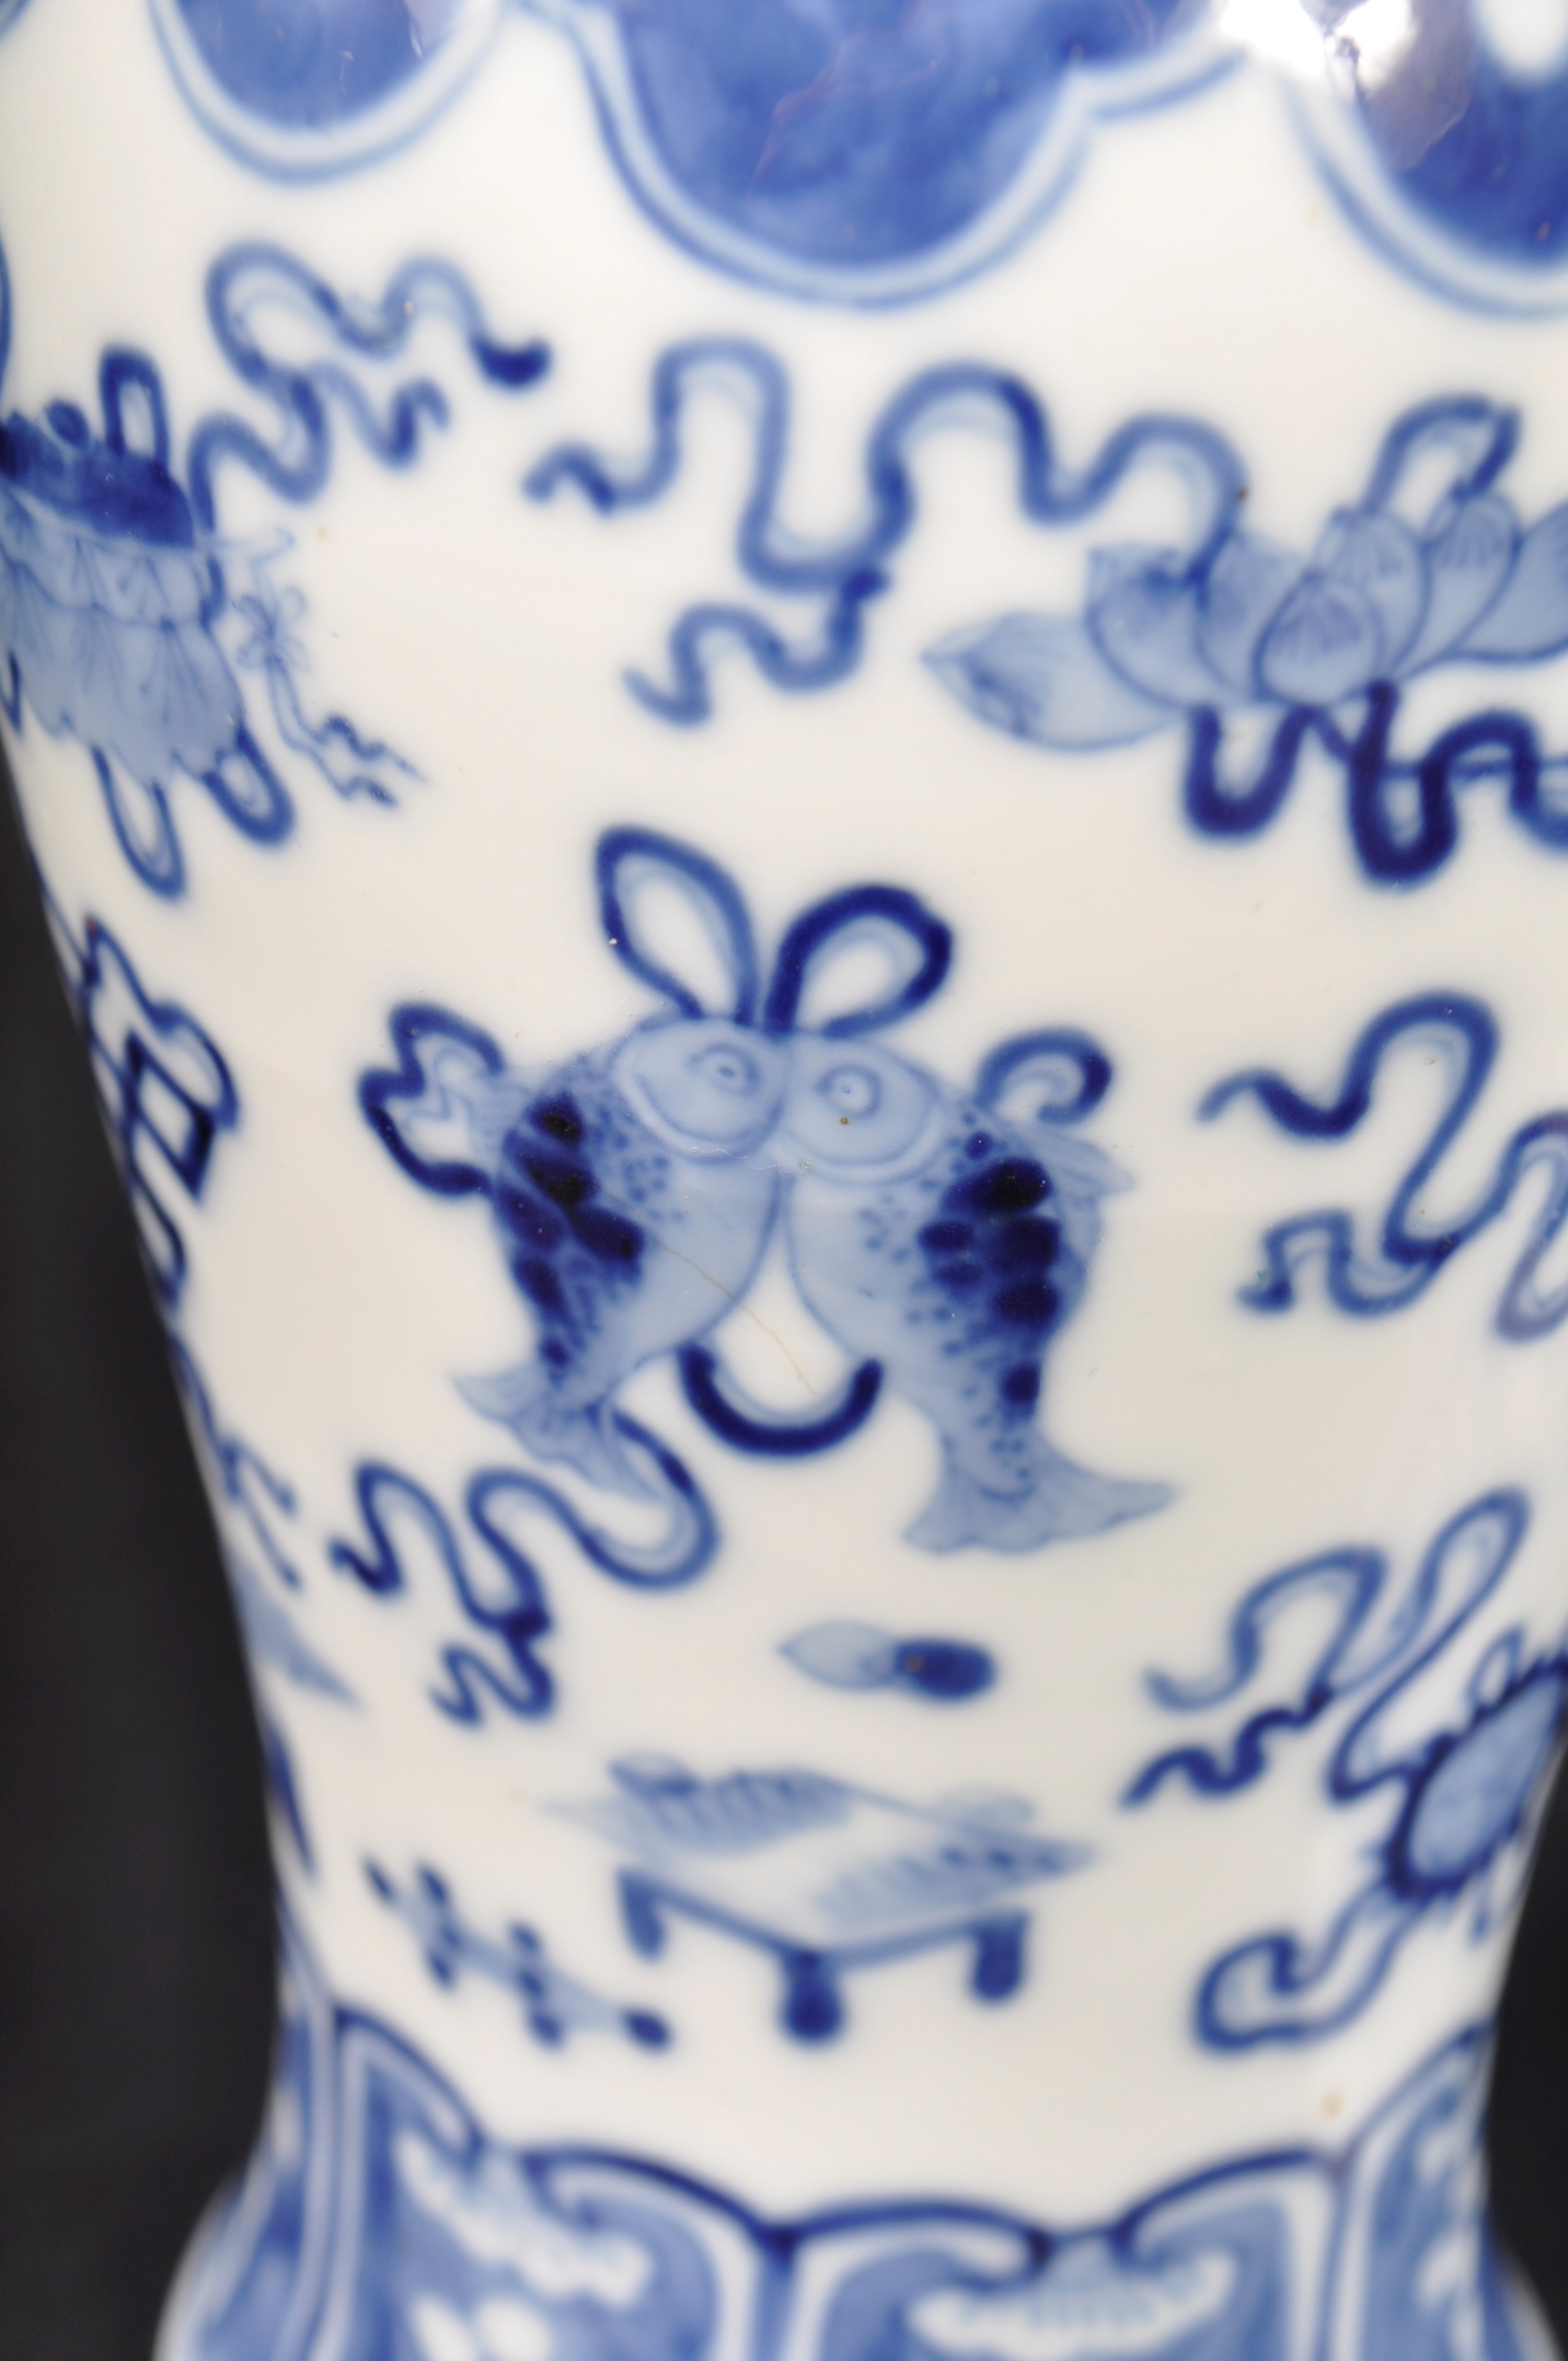 PAIR OF 19TH CENTURY CHINESE KANGXI MARK PRECIOUS OBJECT VASES - Image 6 of 11